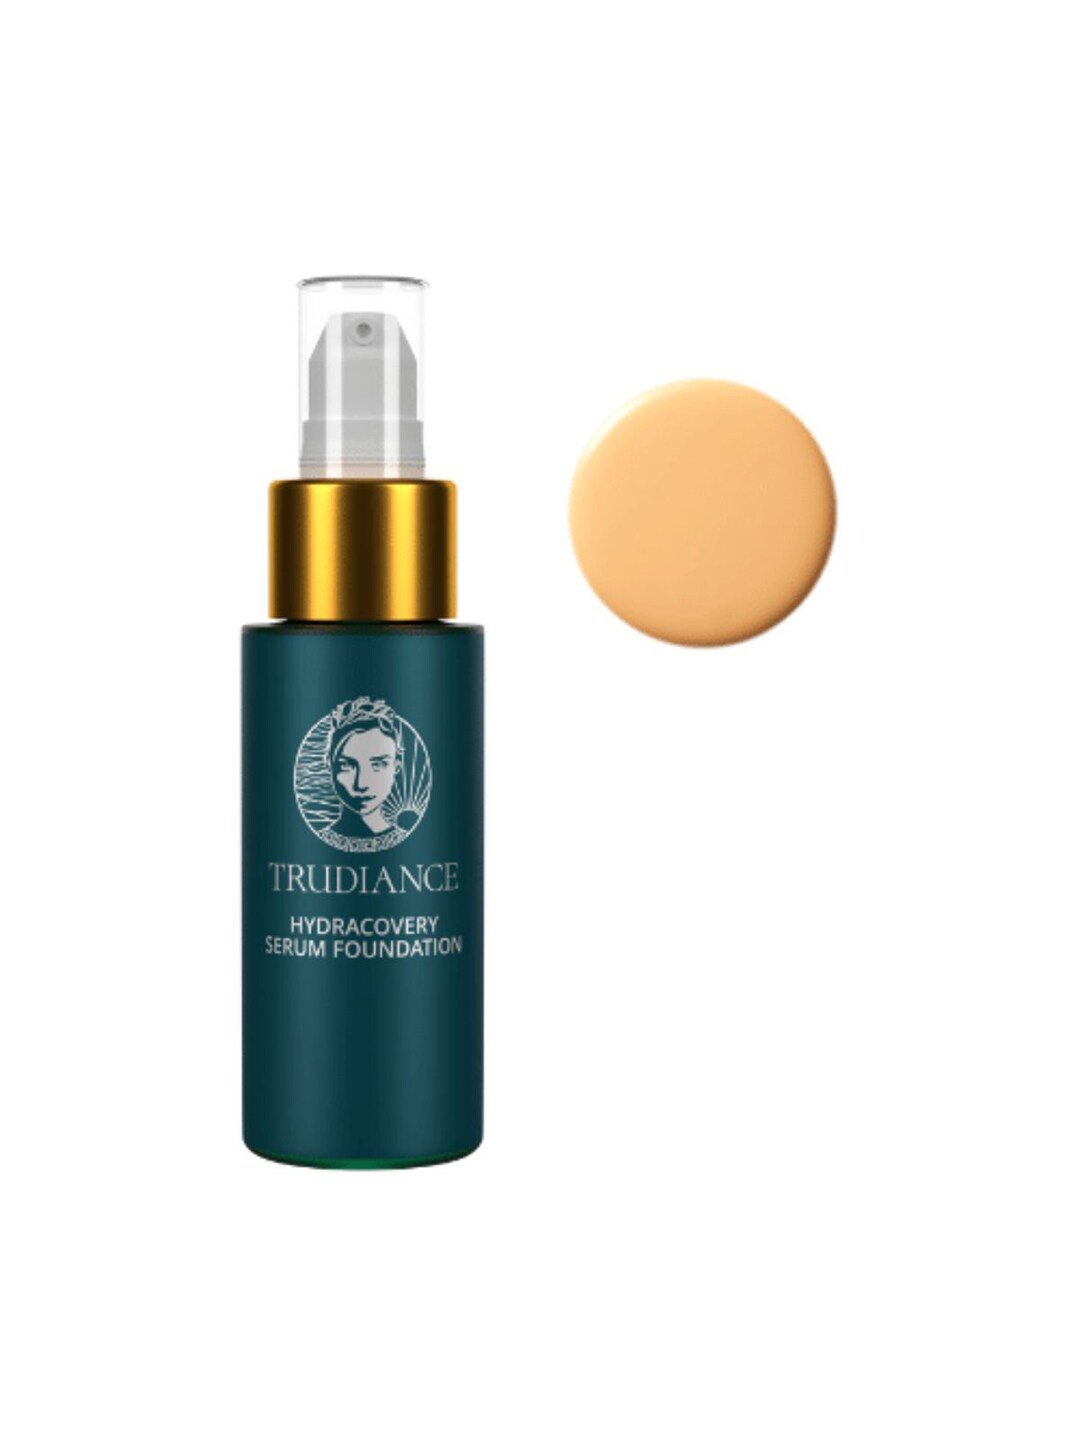 TRUDIANCE HydraCovery Serum Foundation - Arkose 30ml Price in India